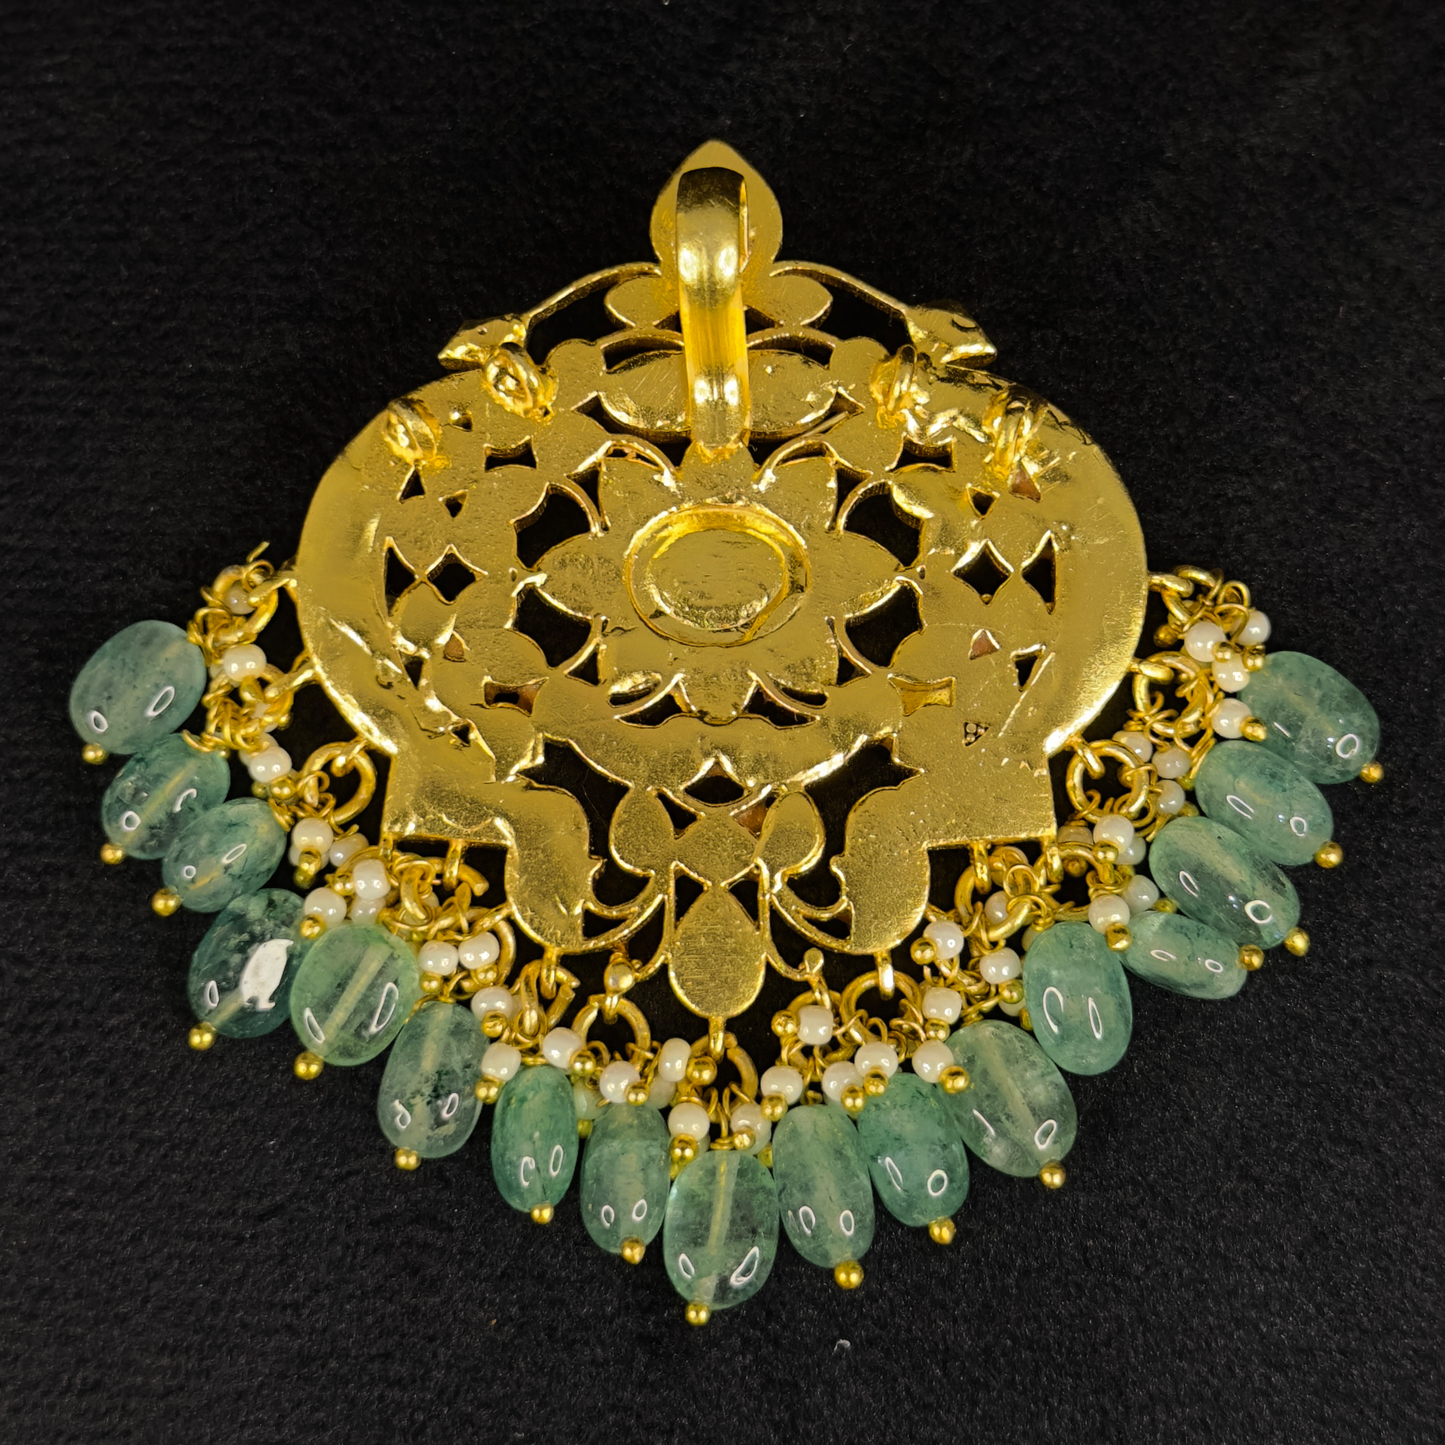 Here is Our Jadau Kundan pendant With motifs of 2 Peacocks with a Flower in the middle. This is 22k Gold plated pendant with Russian emerald beads at bottom